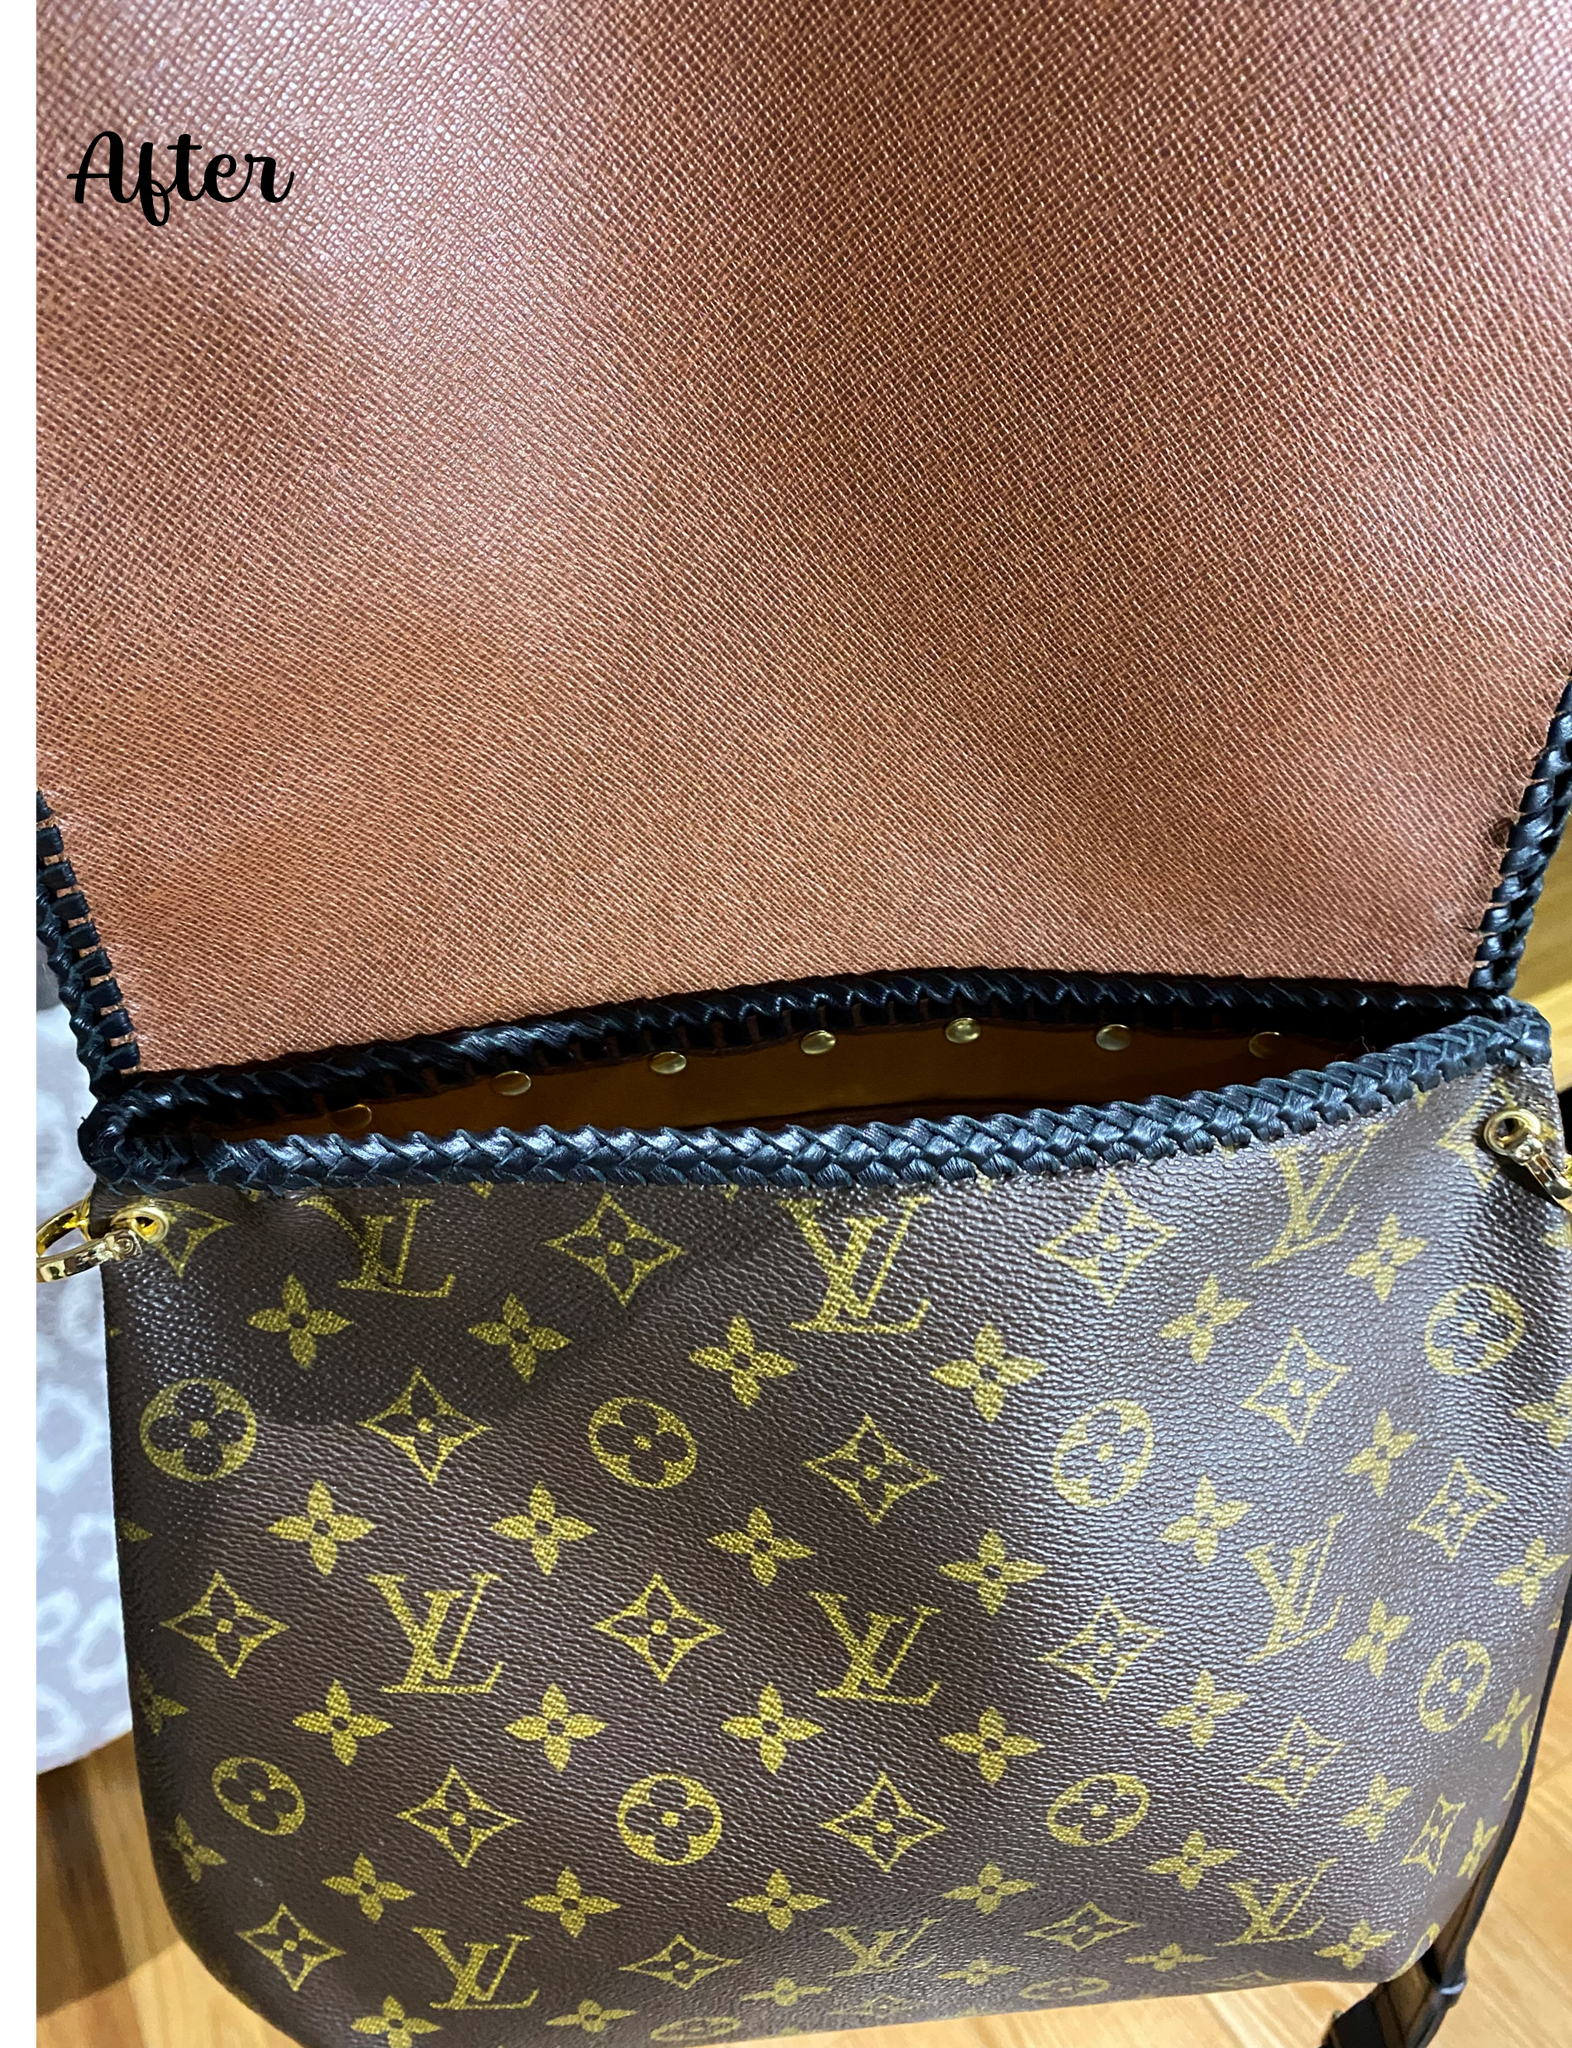 Musette Tango Upcycled  Louis vuitton purse, Upcycled handbag